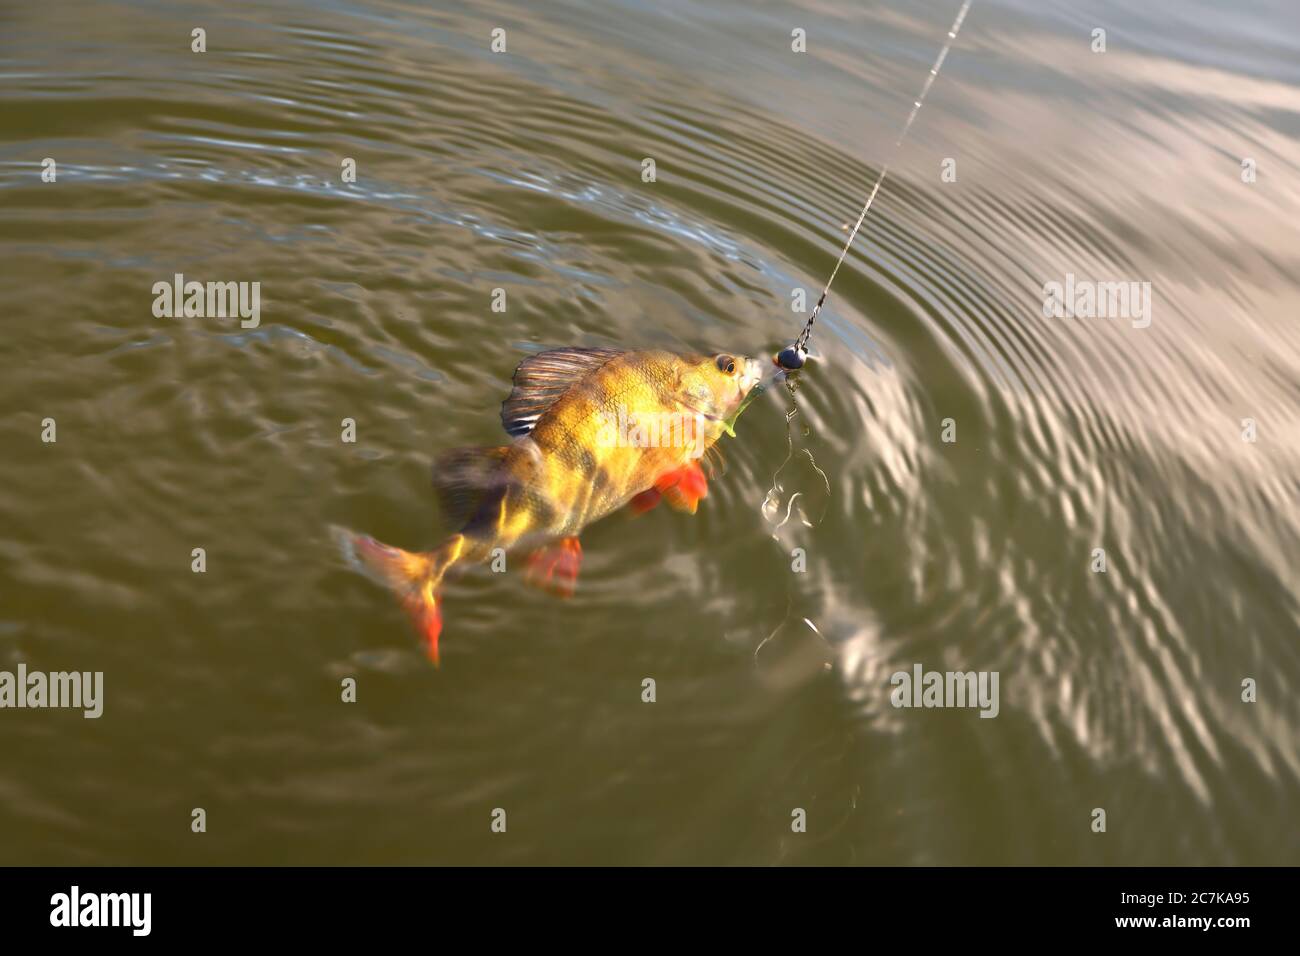 perch, fish with bait vortu on a hook on a fishing line sunshine glint, bright coloring Stock Photo